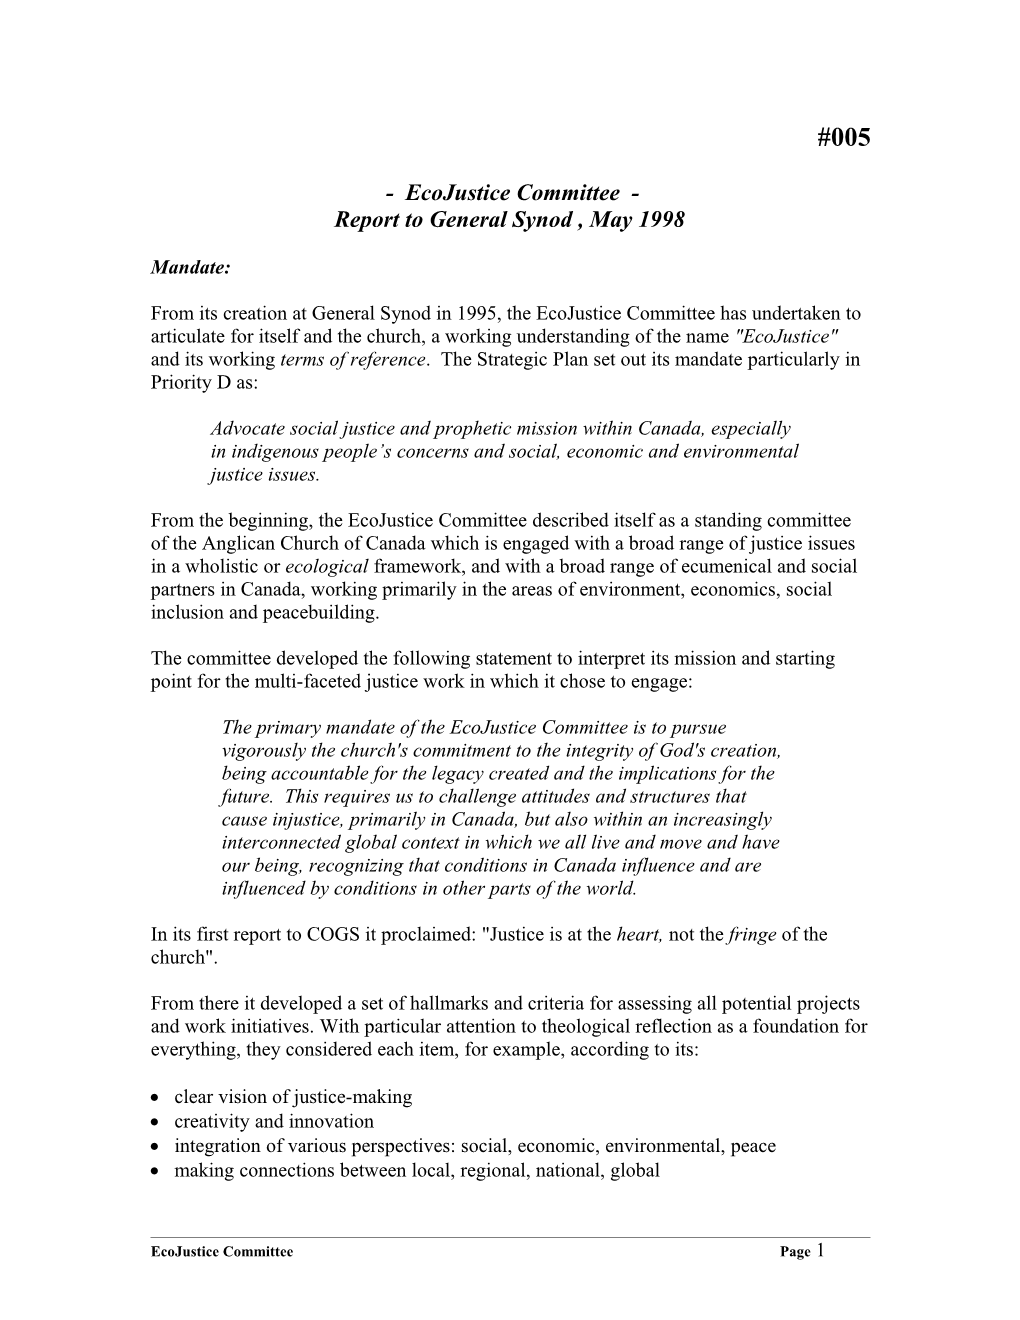 Ecojustice Committee Report to General Synod, May 1998